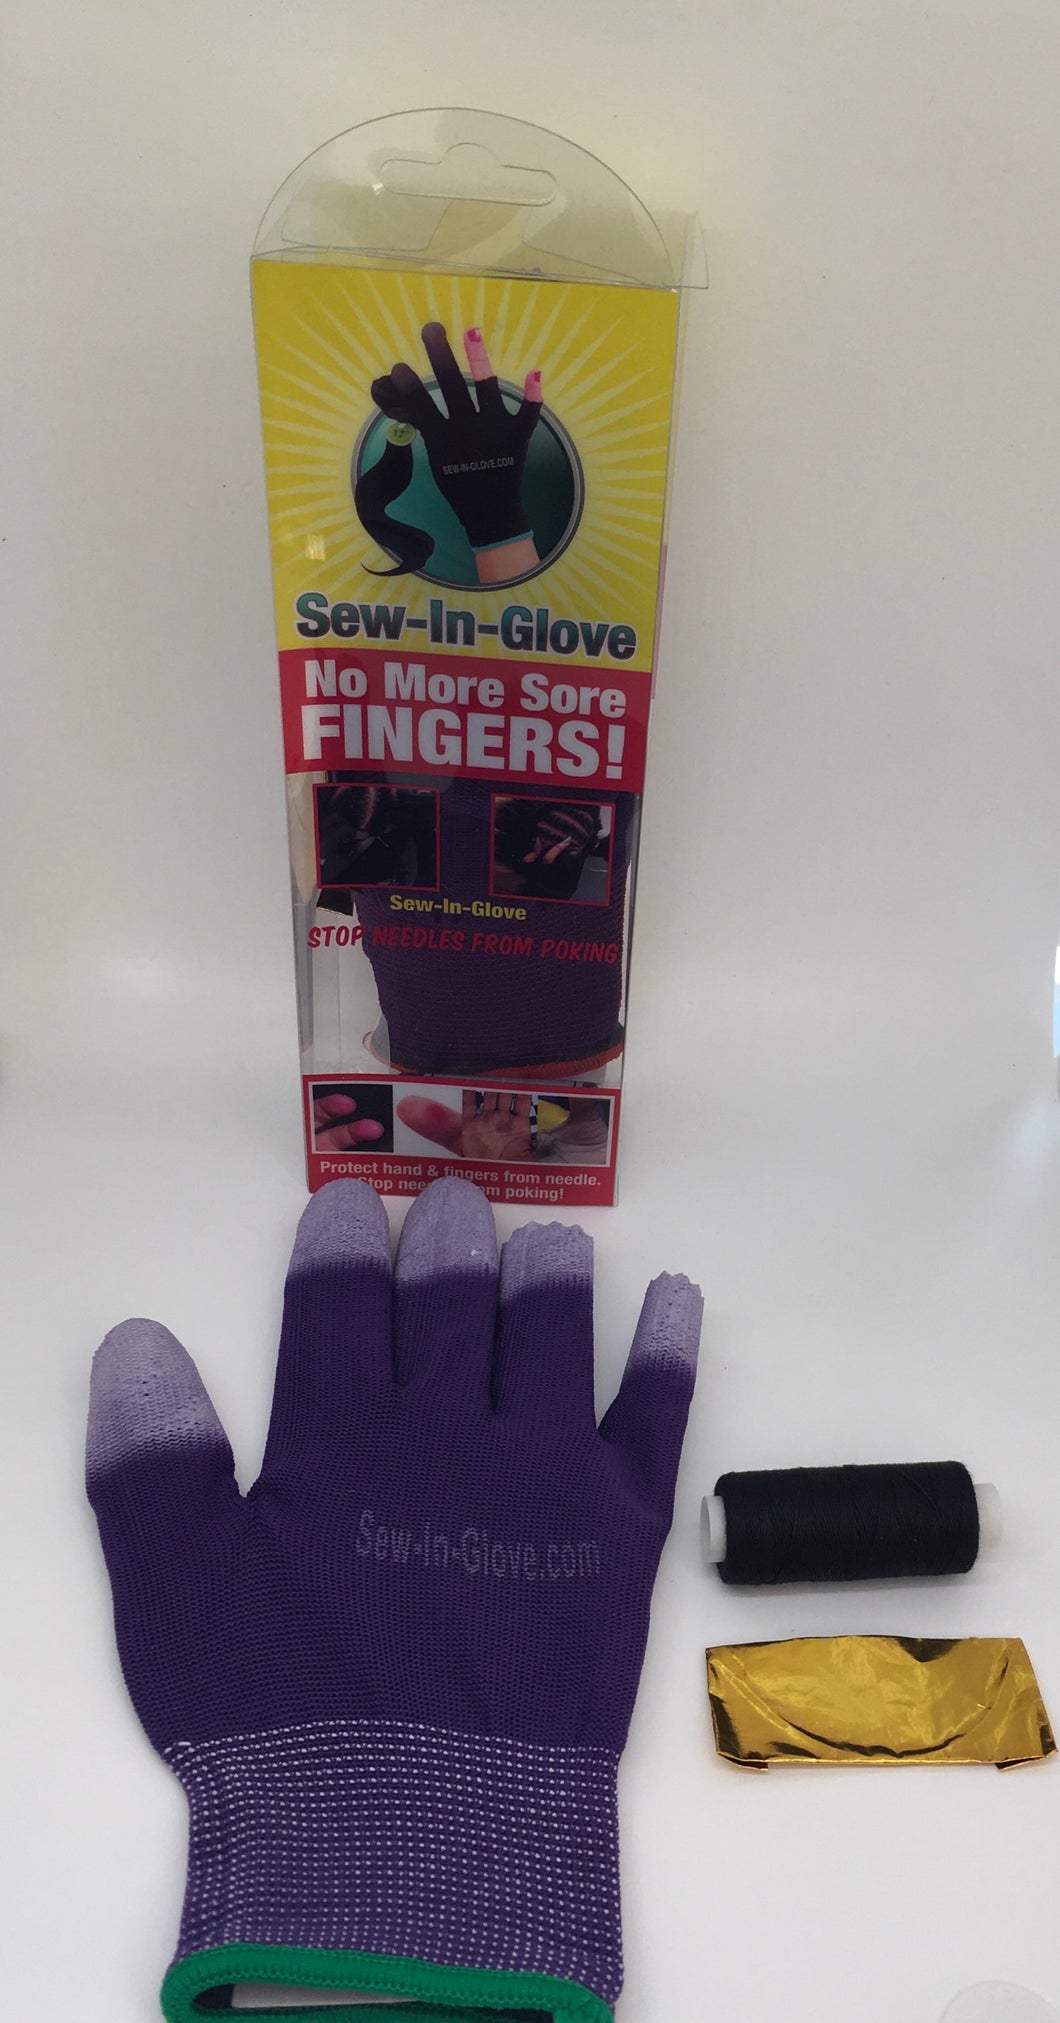 One Purple Sew-In-Glove,One Needle and One Thread